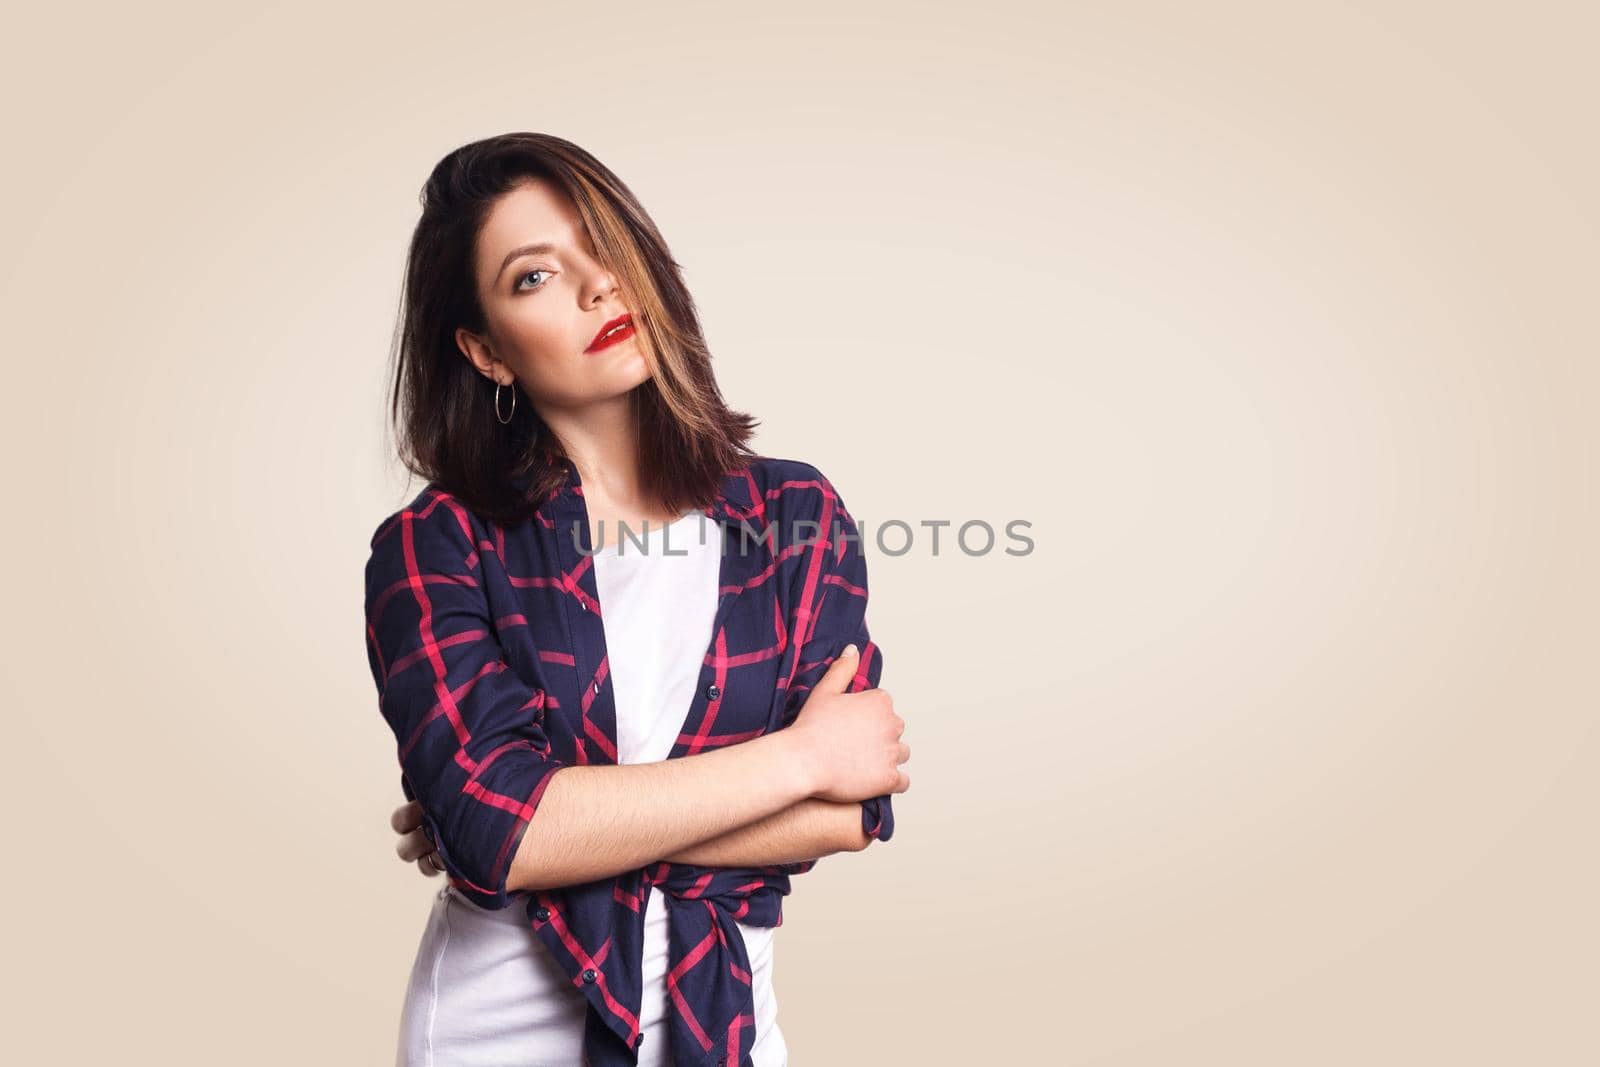 Portrait of beautiful happy girl in casual style with makeup and black bun hairstyle looking at camera with crossed arms. studio shot on beige background.